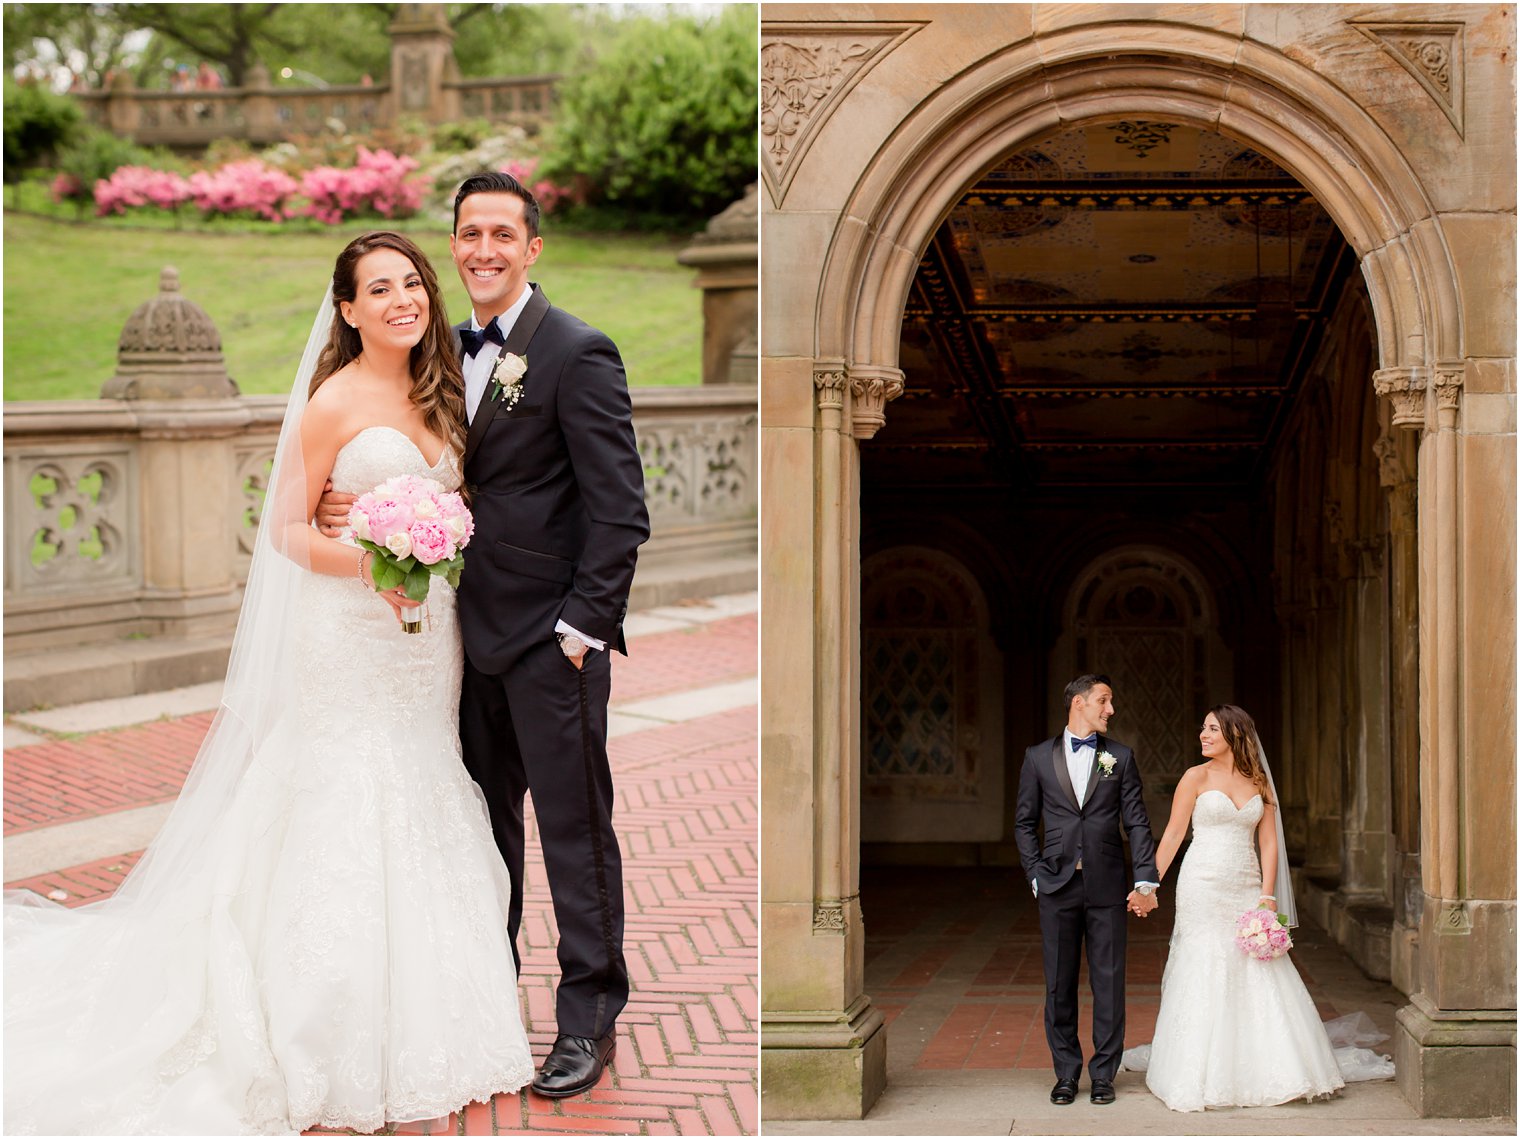 Classic NYC wedding in Central Park | Photo by Idalia Photography